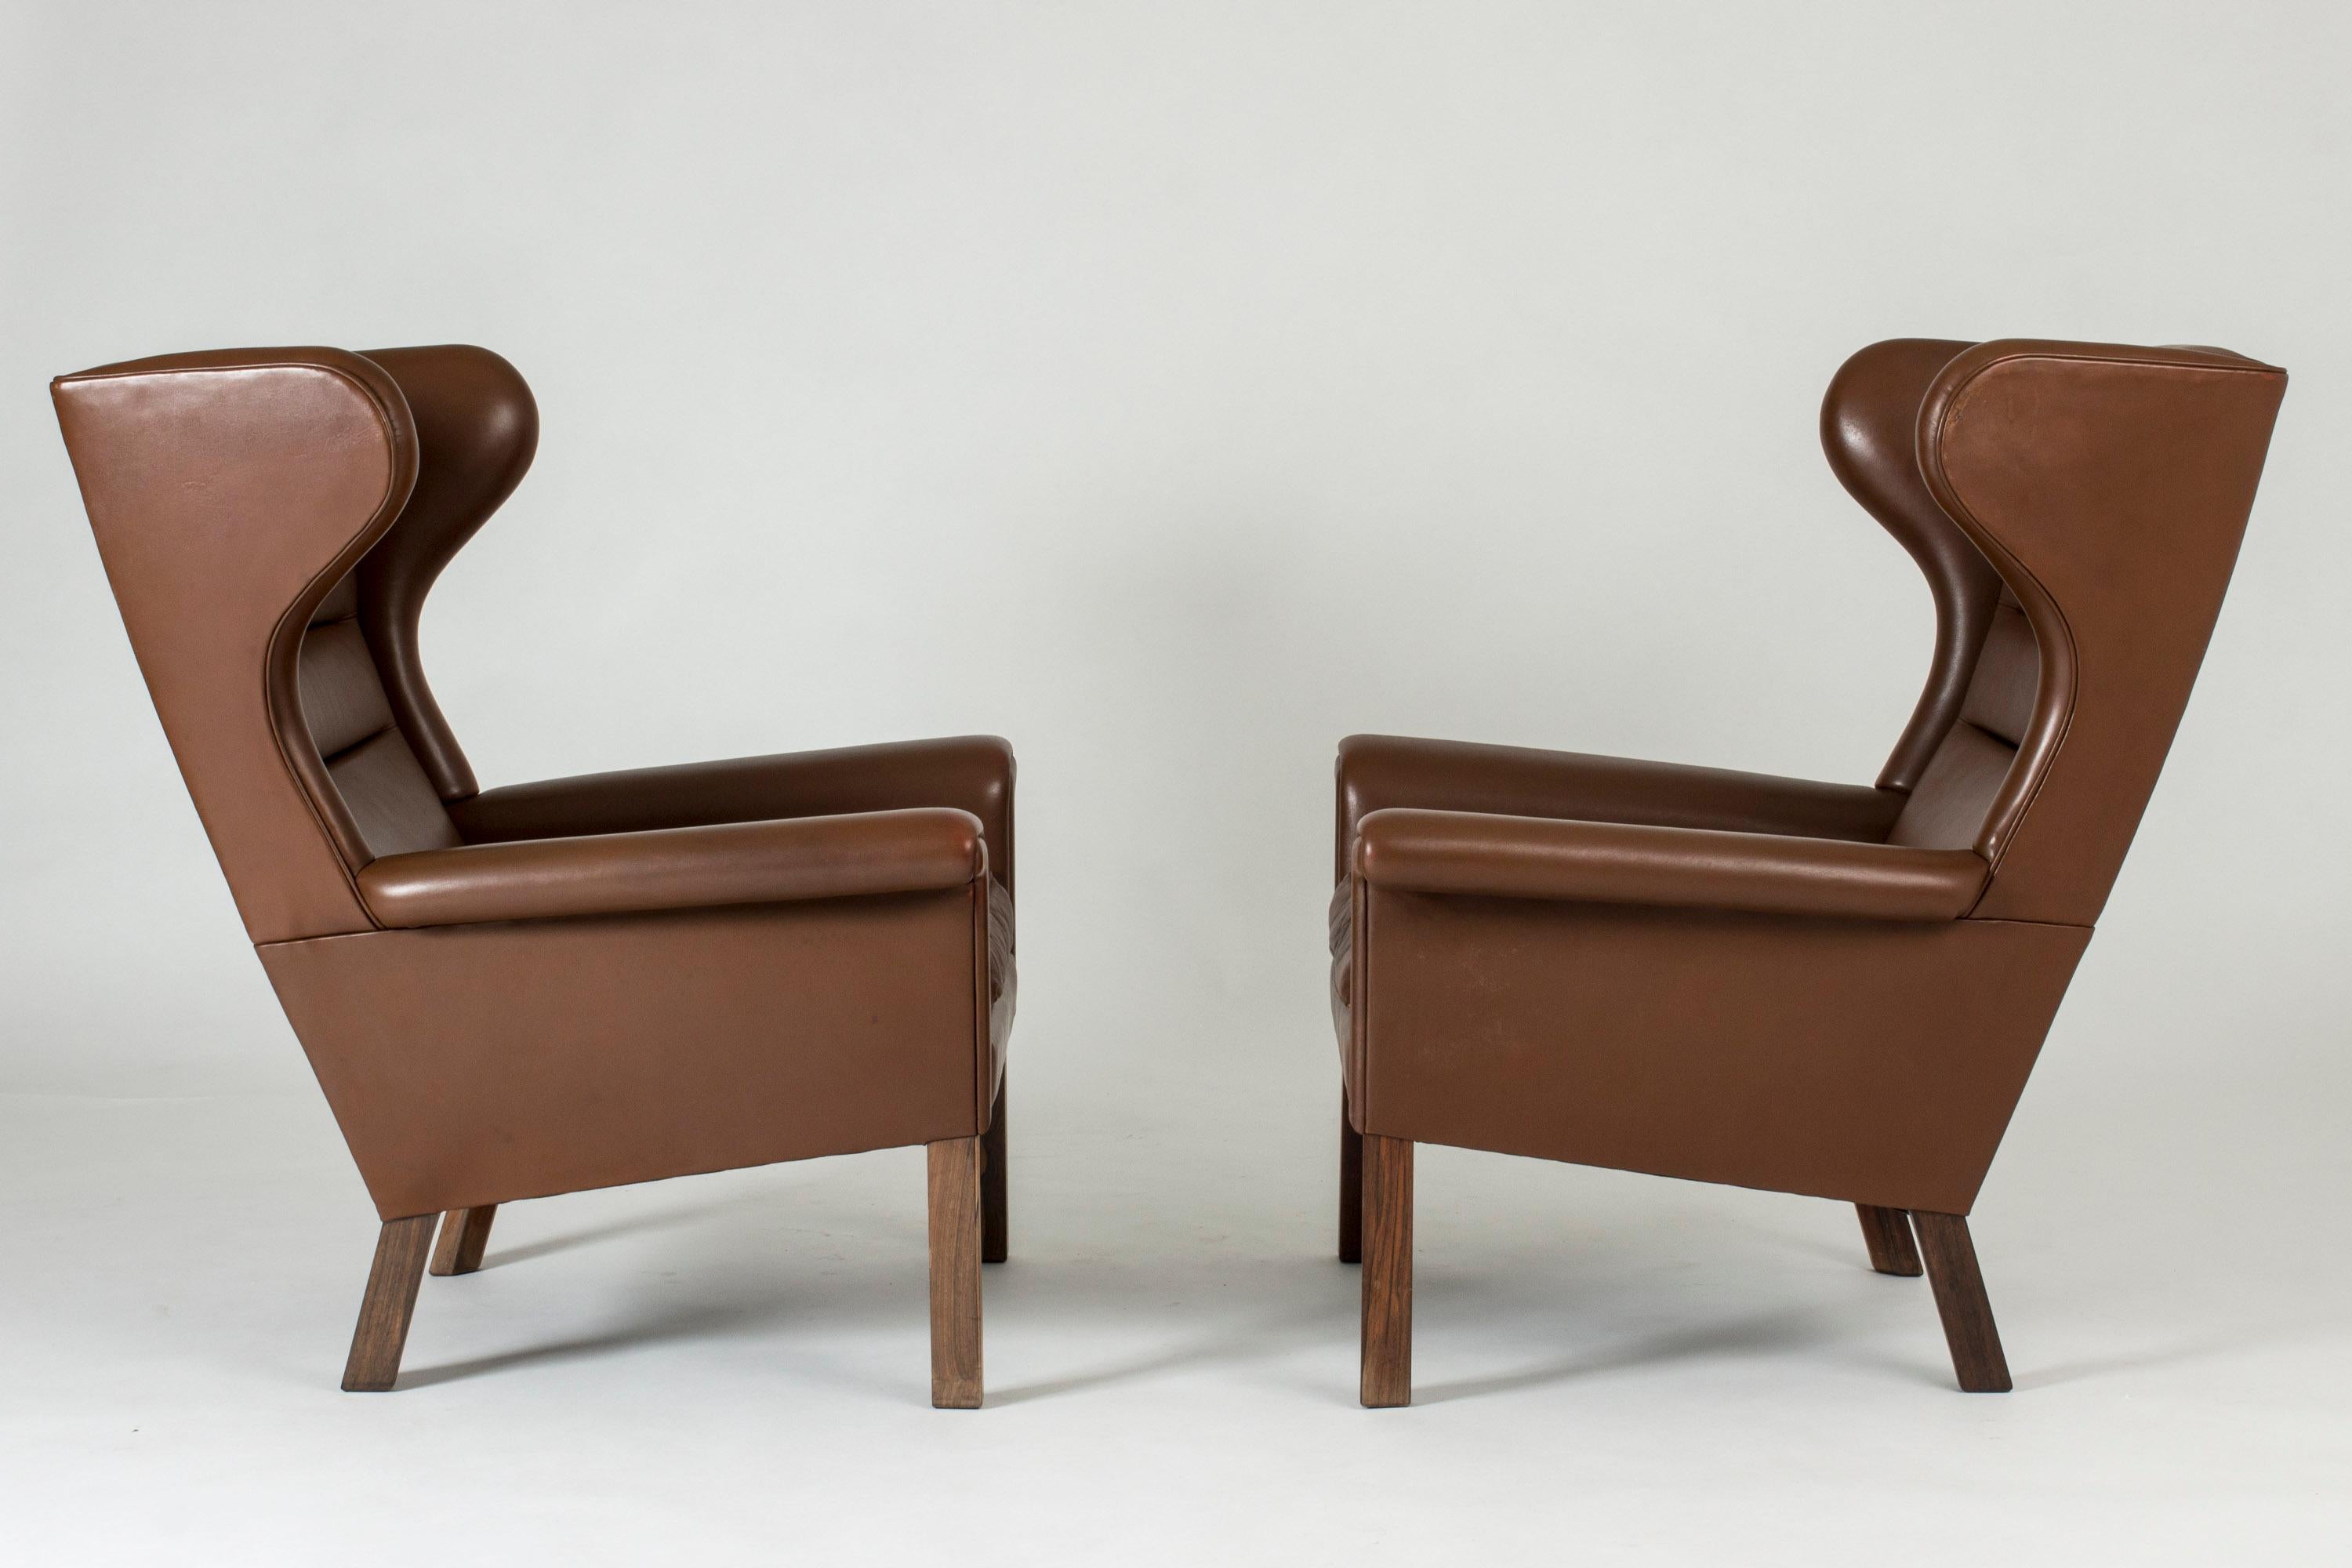 Danish Pair of Leather Lounge Chairs by Hans J. Wegner for AP Stolen